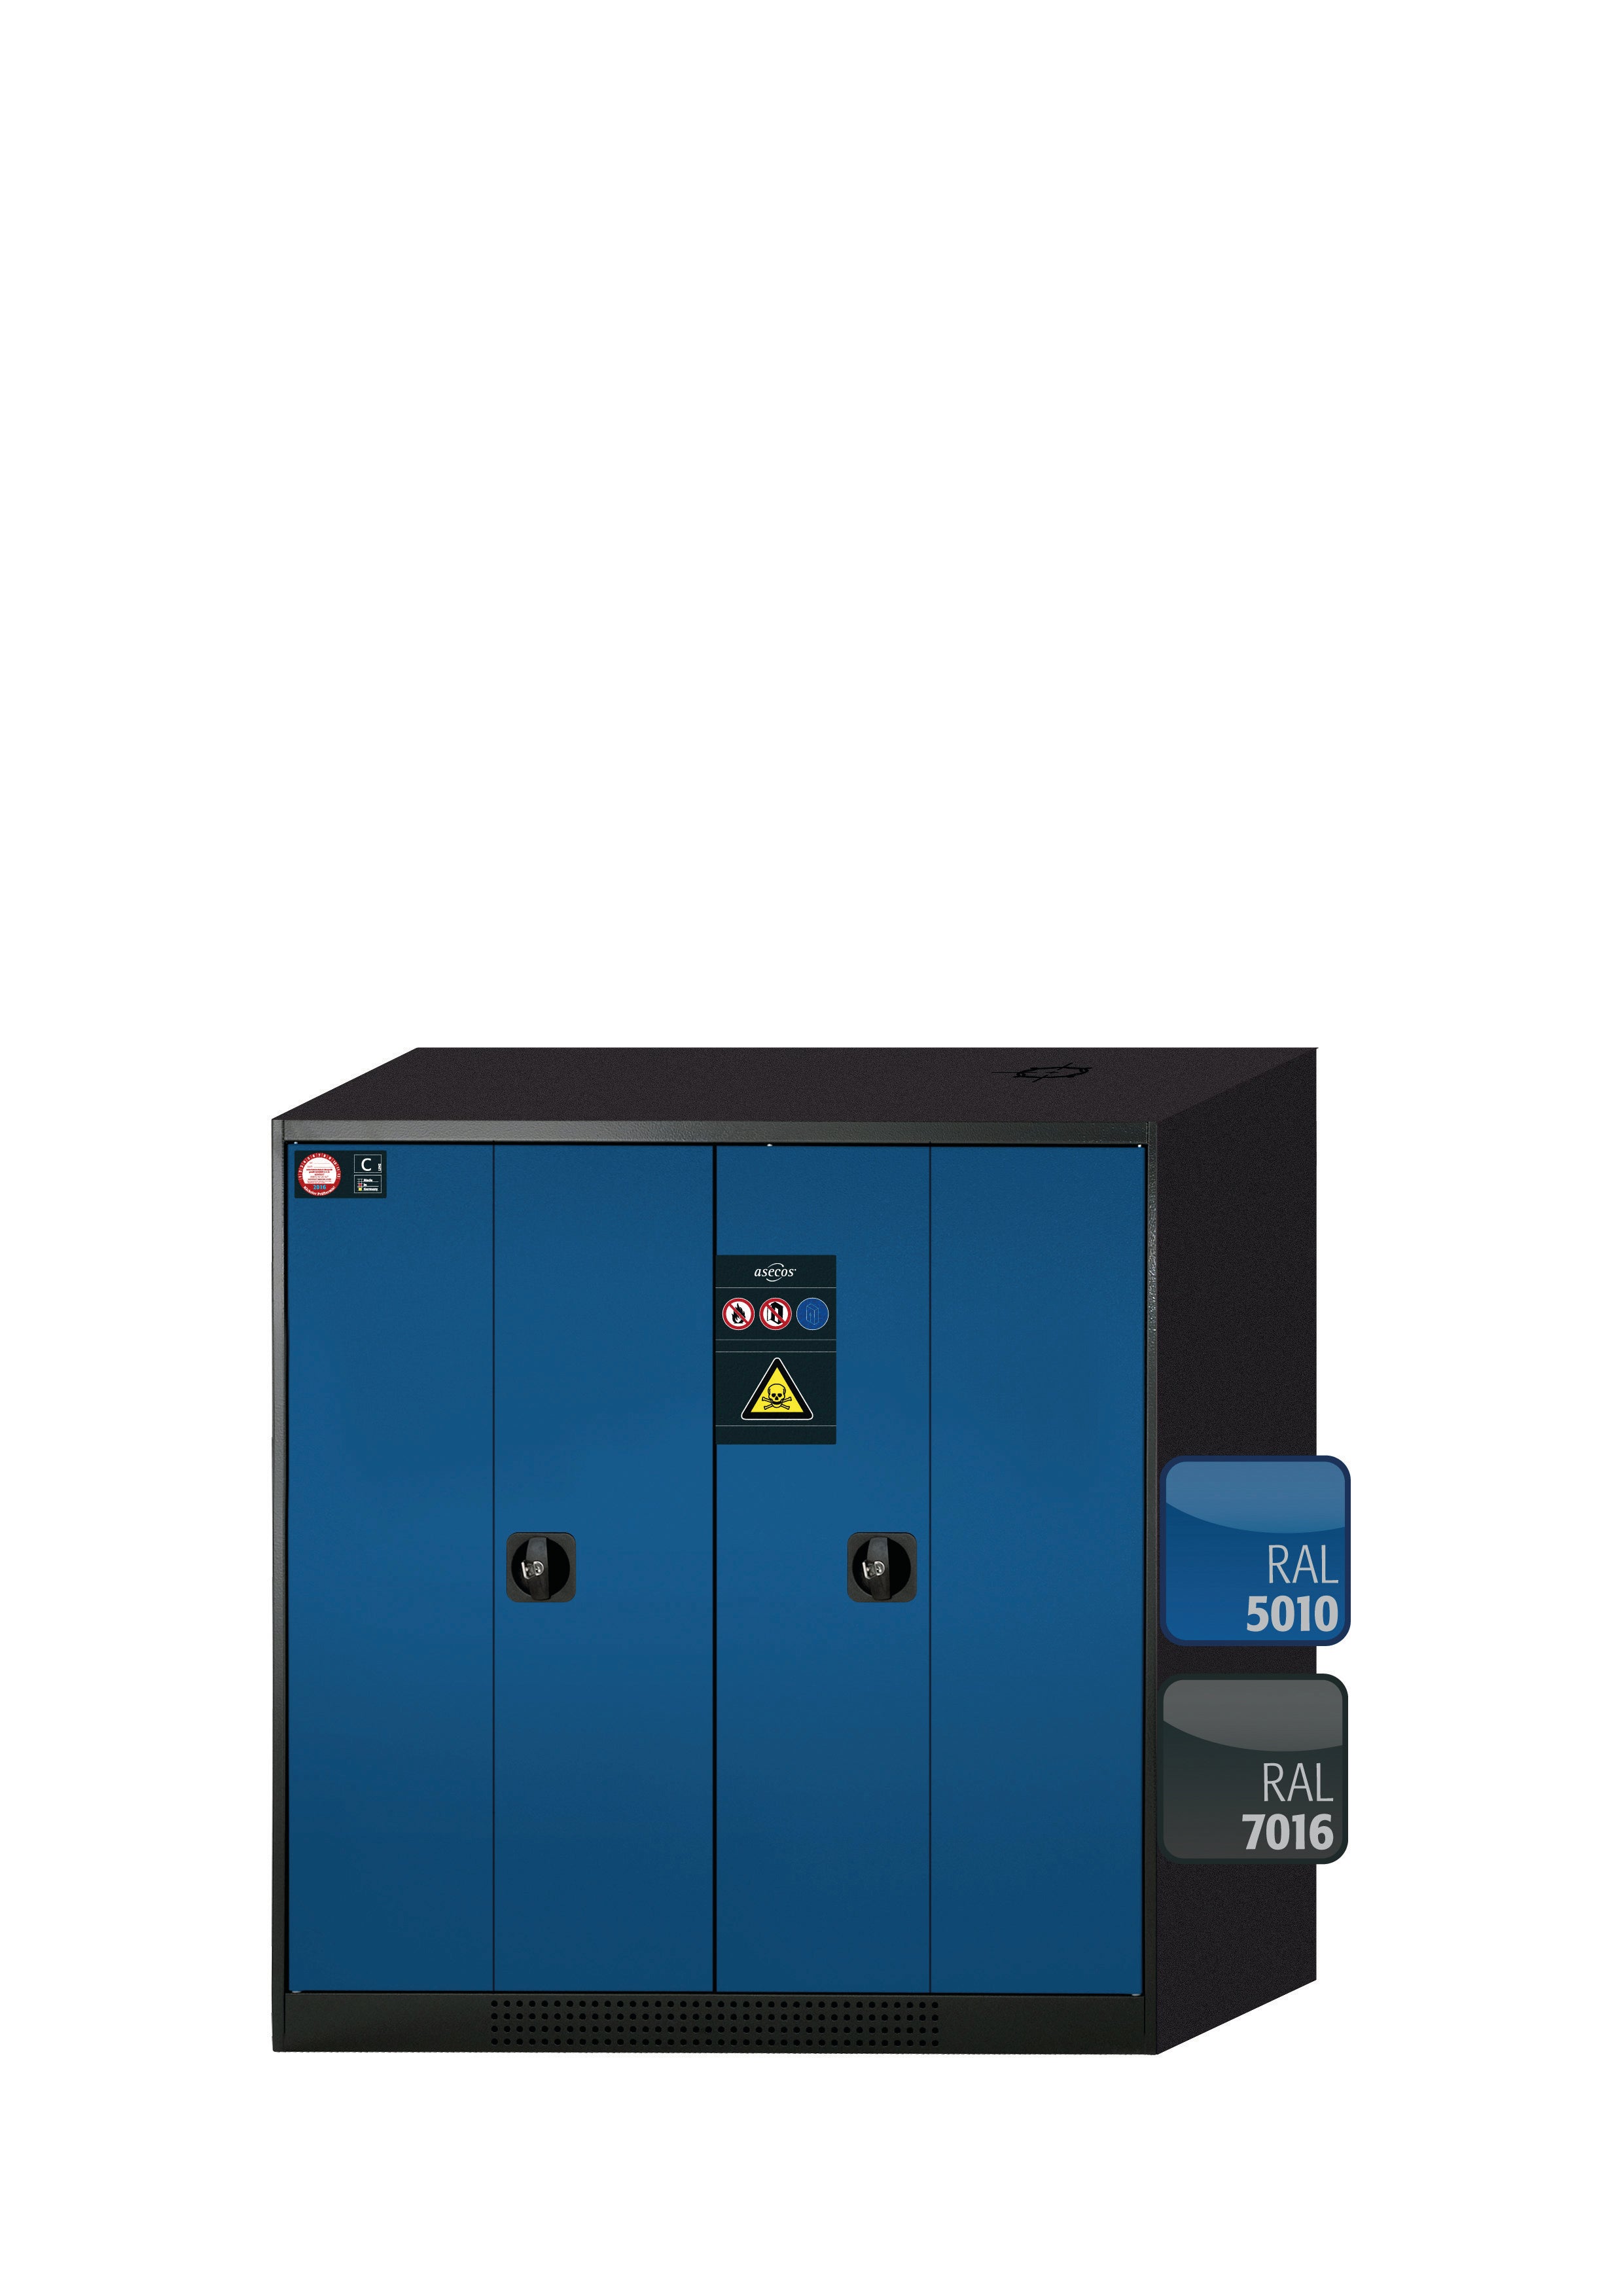 Chemical cabinet CS-PHOENIX model CS.110.105.FD in gentian blue RAL 5010 with 2x pull-out shelves AbZ (sheet steel/polypropylene)